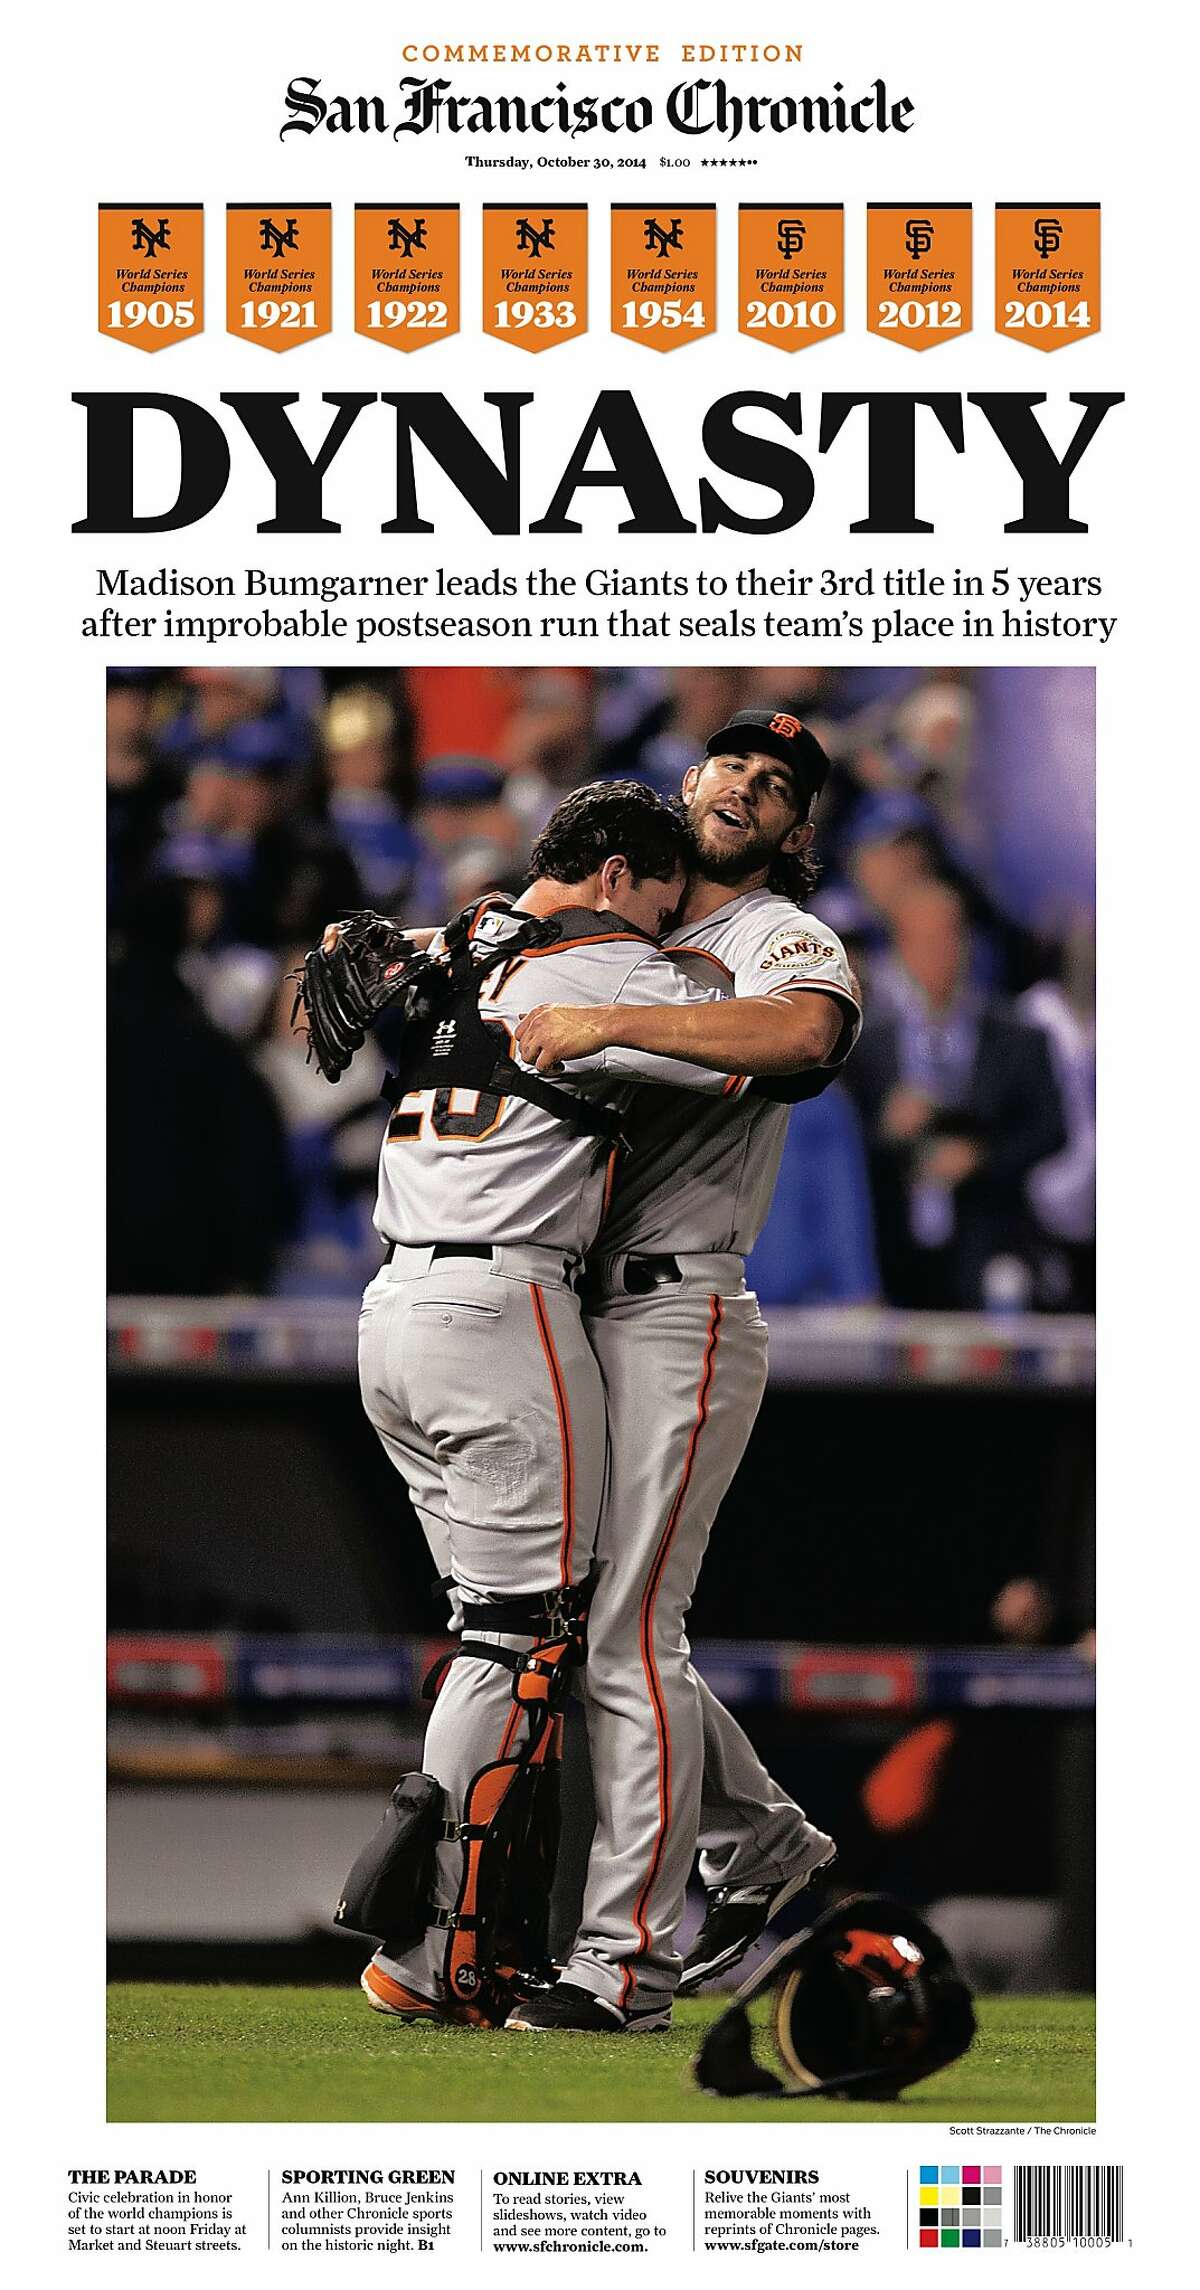 Historic Chronicle Front Page October 30, 2014 San Francisco Giants win their third World Series in 5 years, beating the Kansas City Royals Chron365, Chroncover